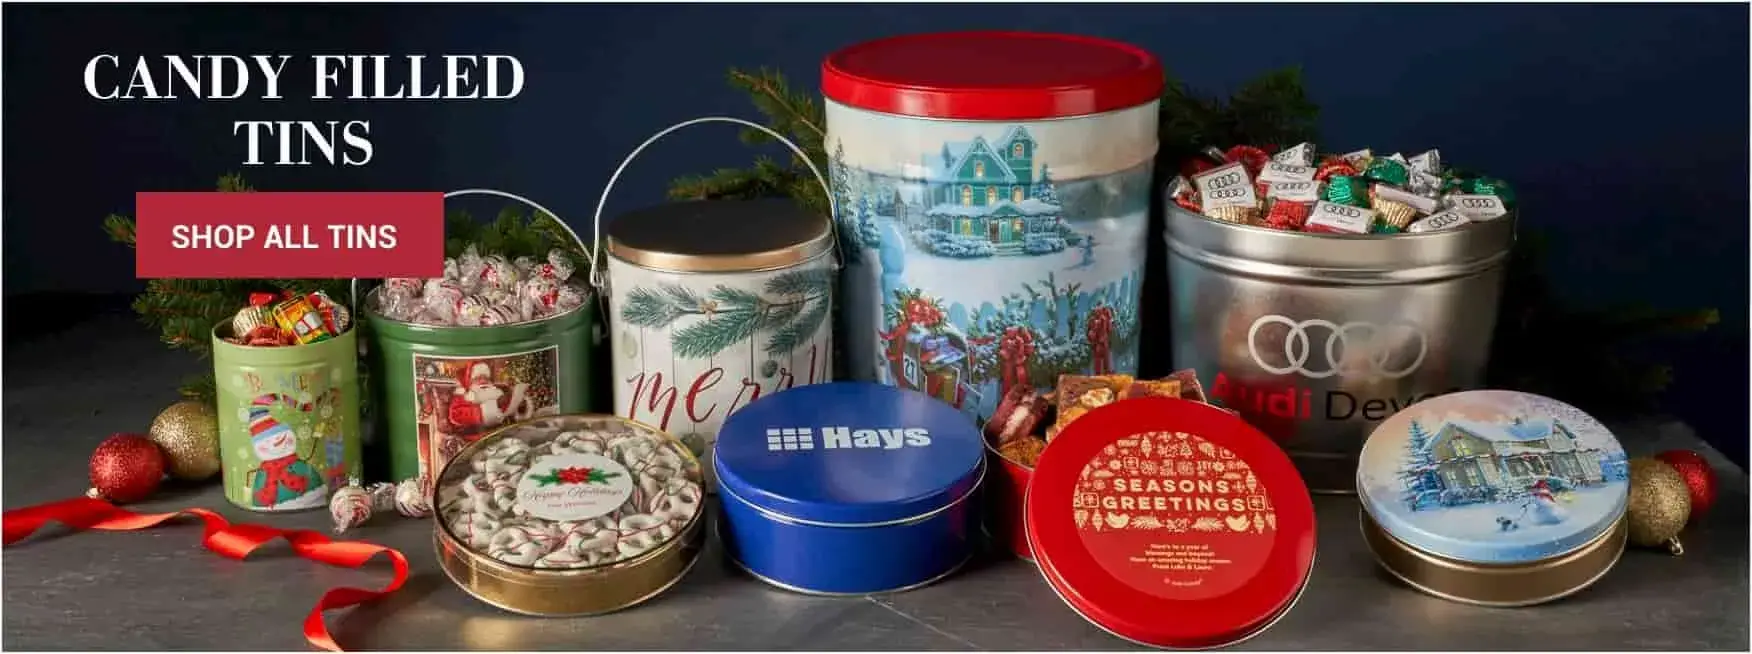 Personalized Candy Filled Christmas Tins